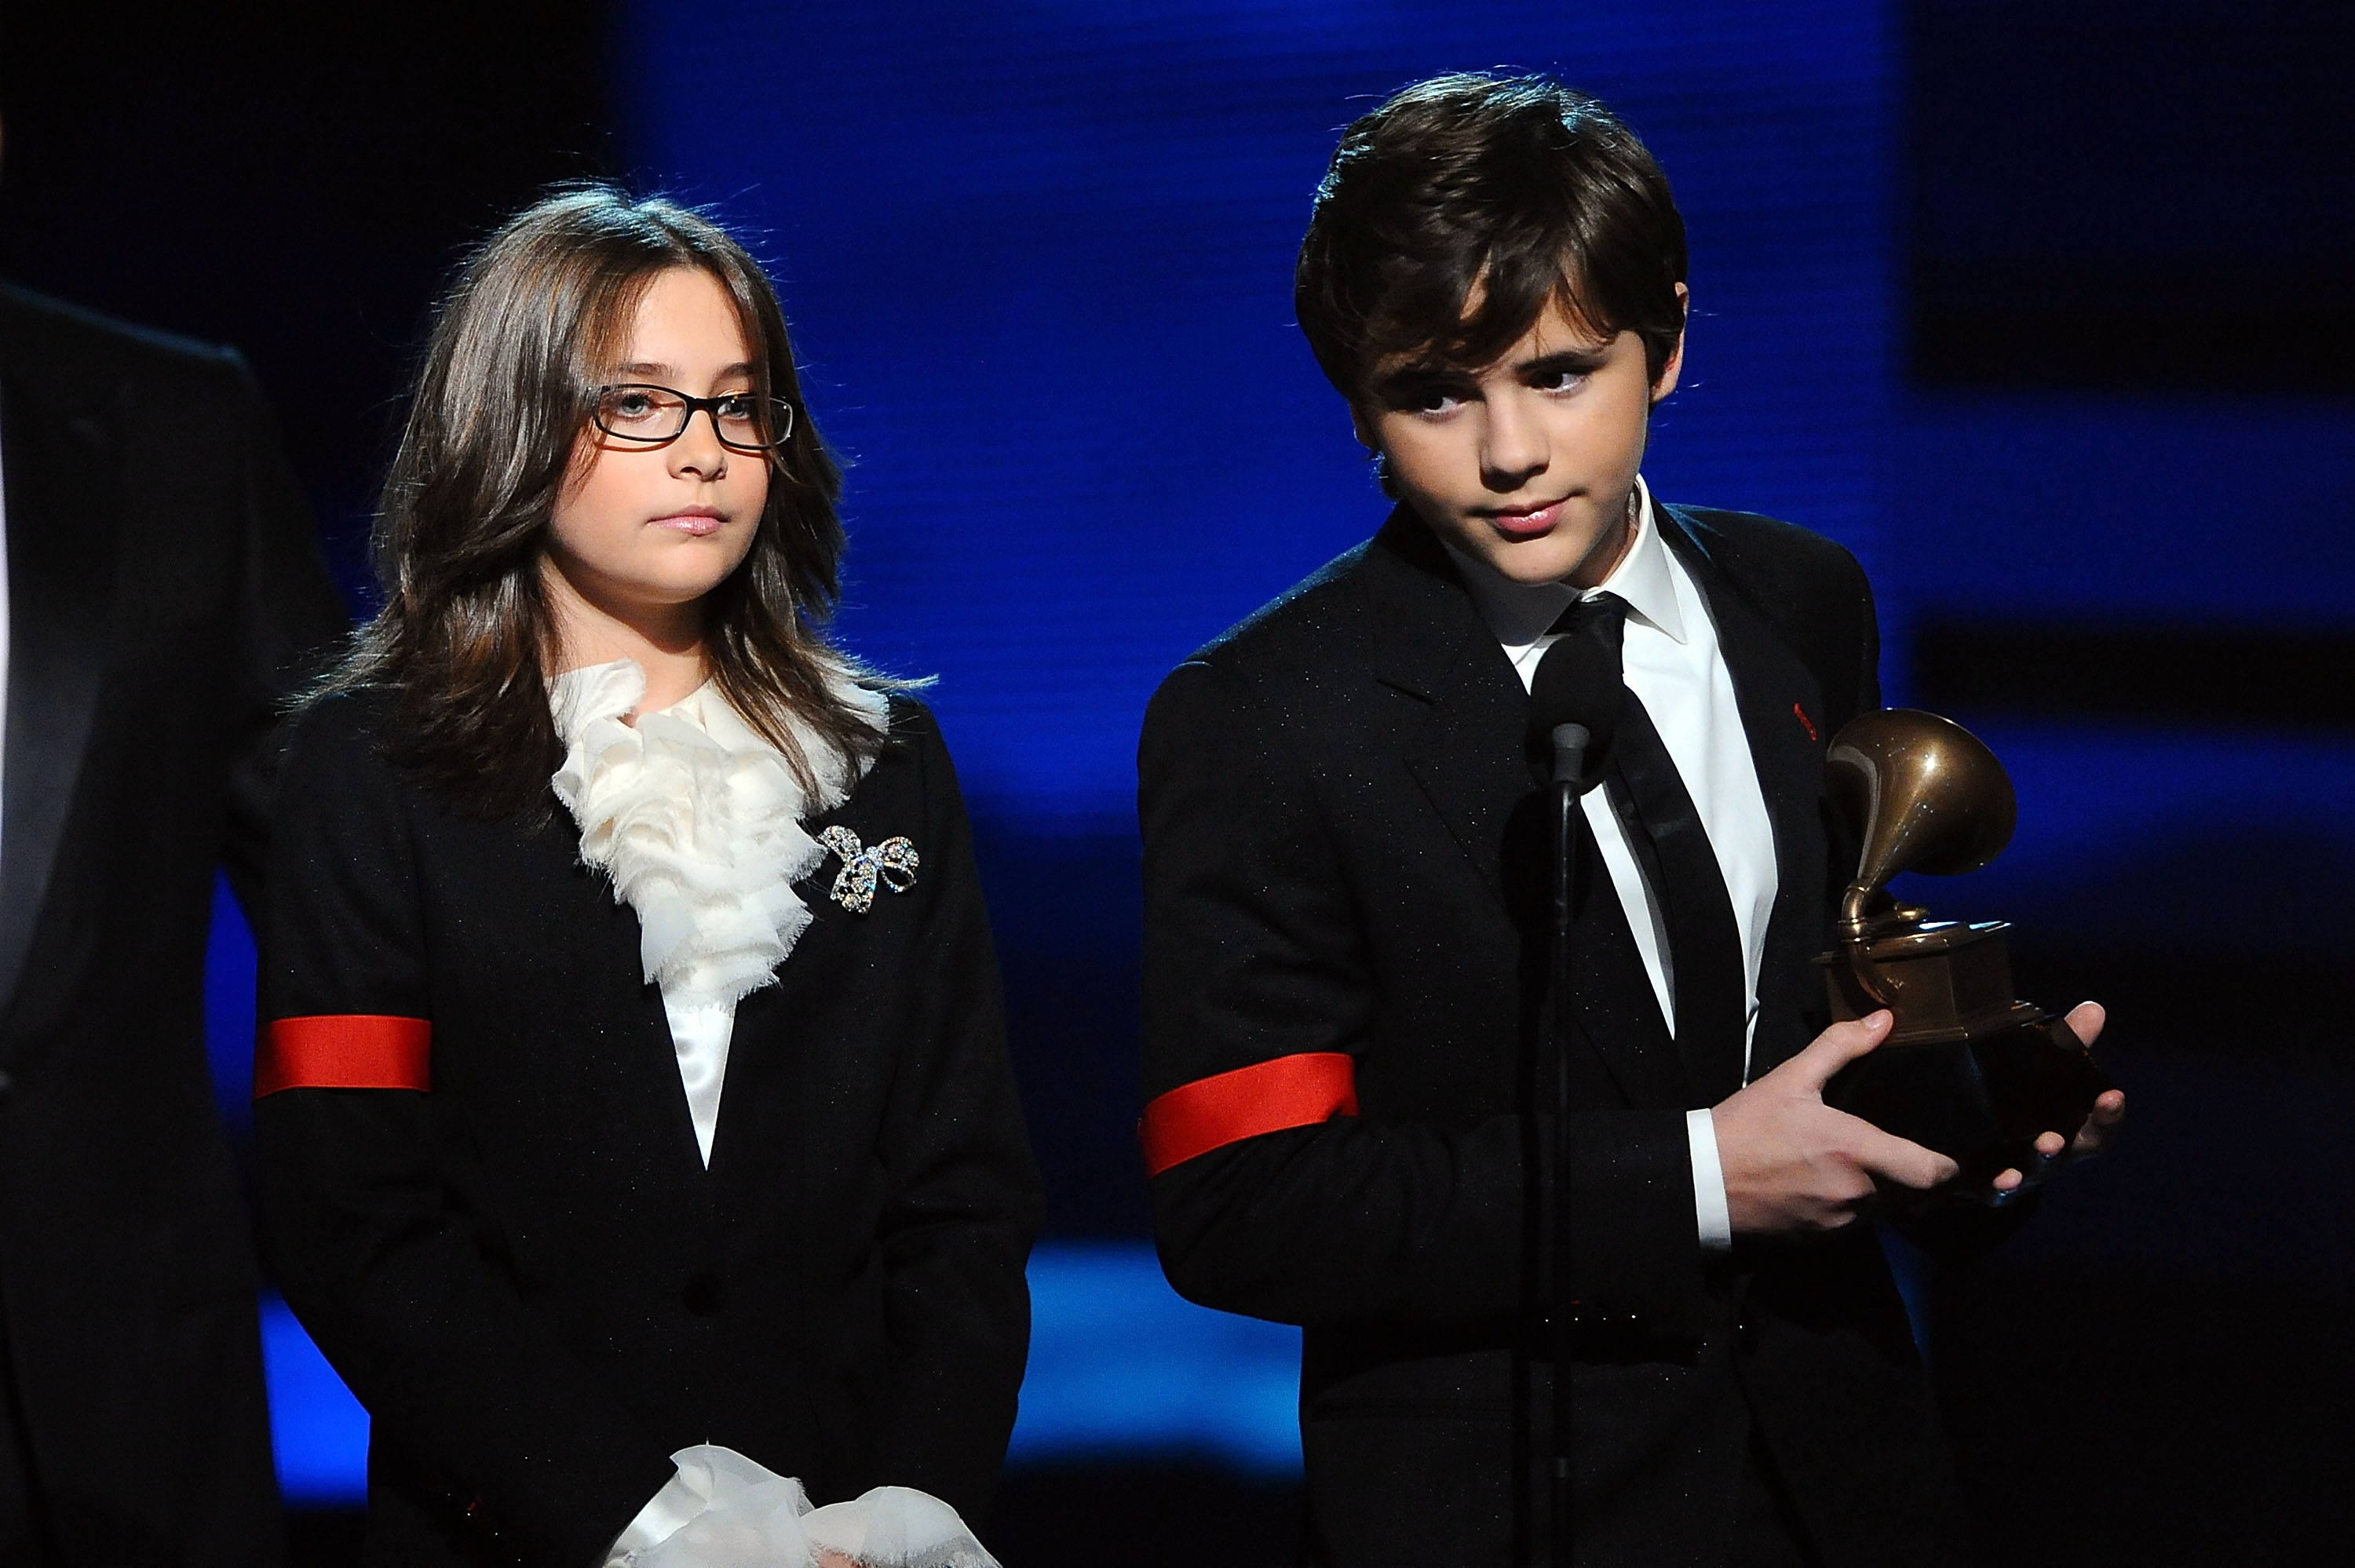 Paris and Prince Michael Jackson at the 52nd Annual GRAMMY Awards in Los Angeles, California on January 31, 2010 | Source: Getty Images